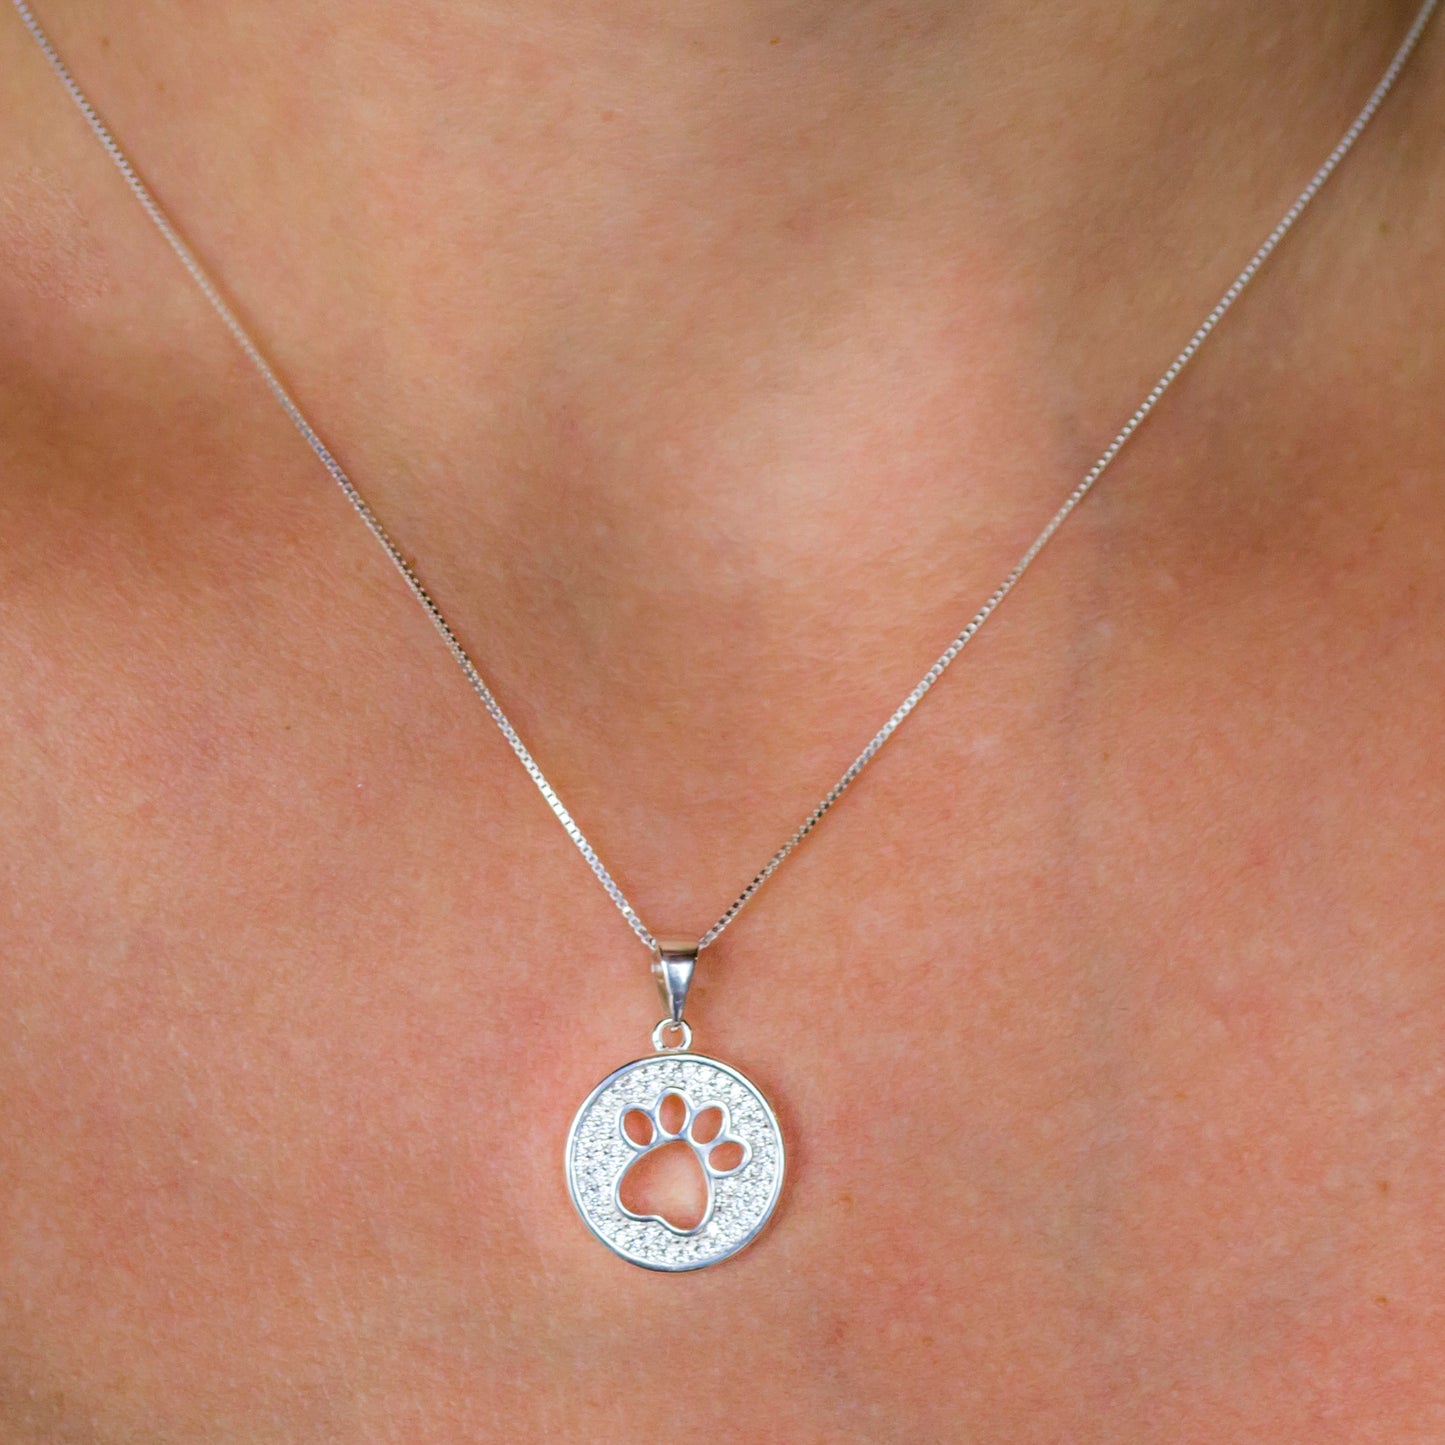 Coin with Dog Paw Pendant